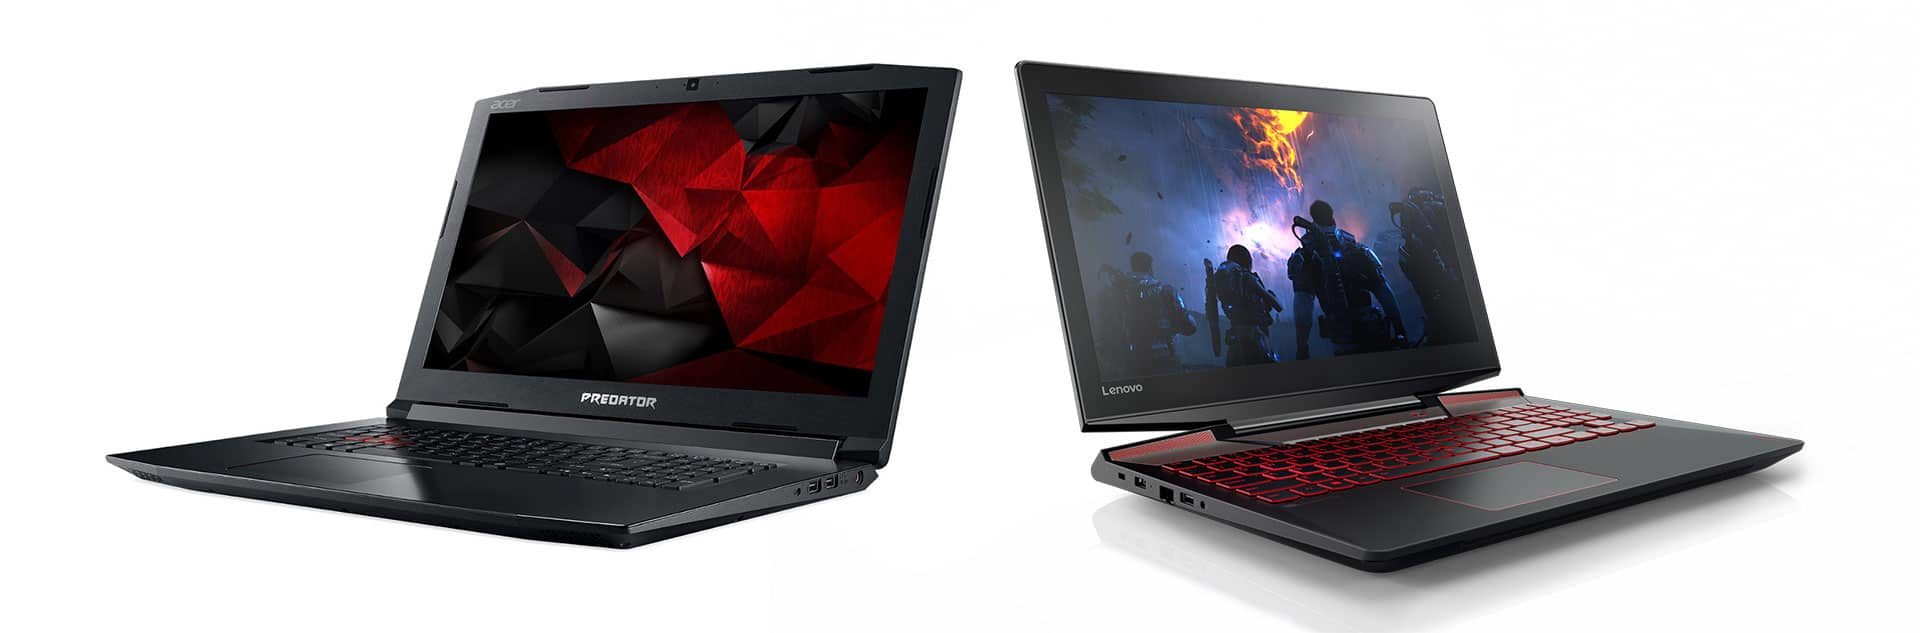 Keep an eye for sales on the GTX 1060 options: Acer Helios 300 (left) and Lenovo Legion Y720 (right)